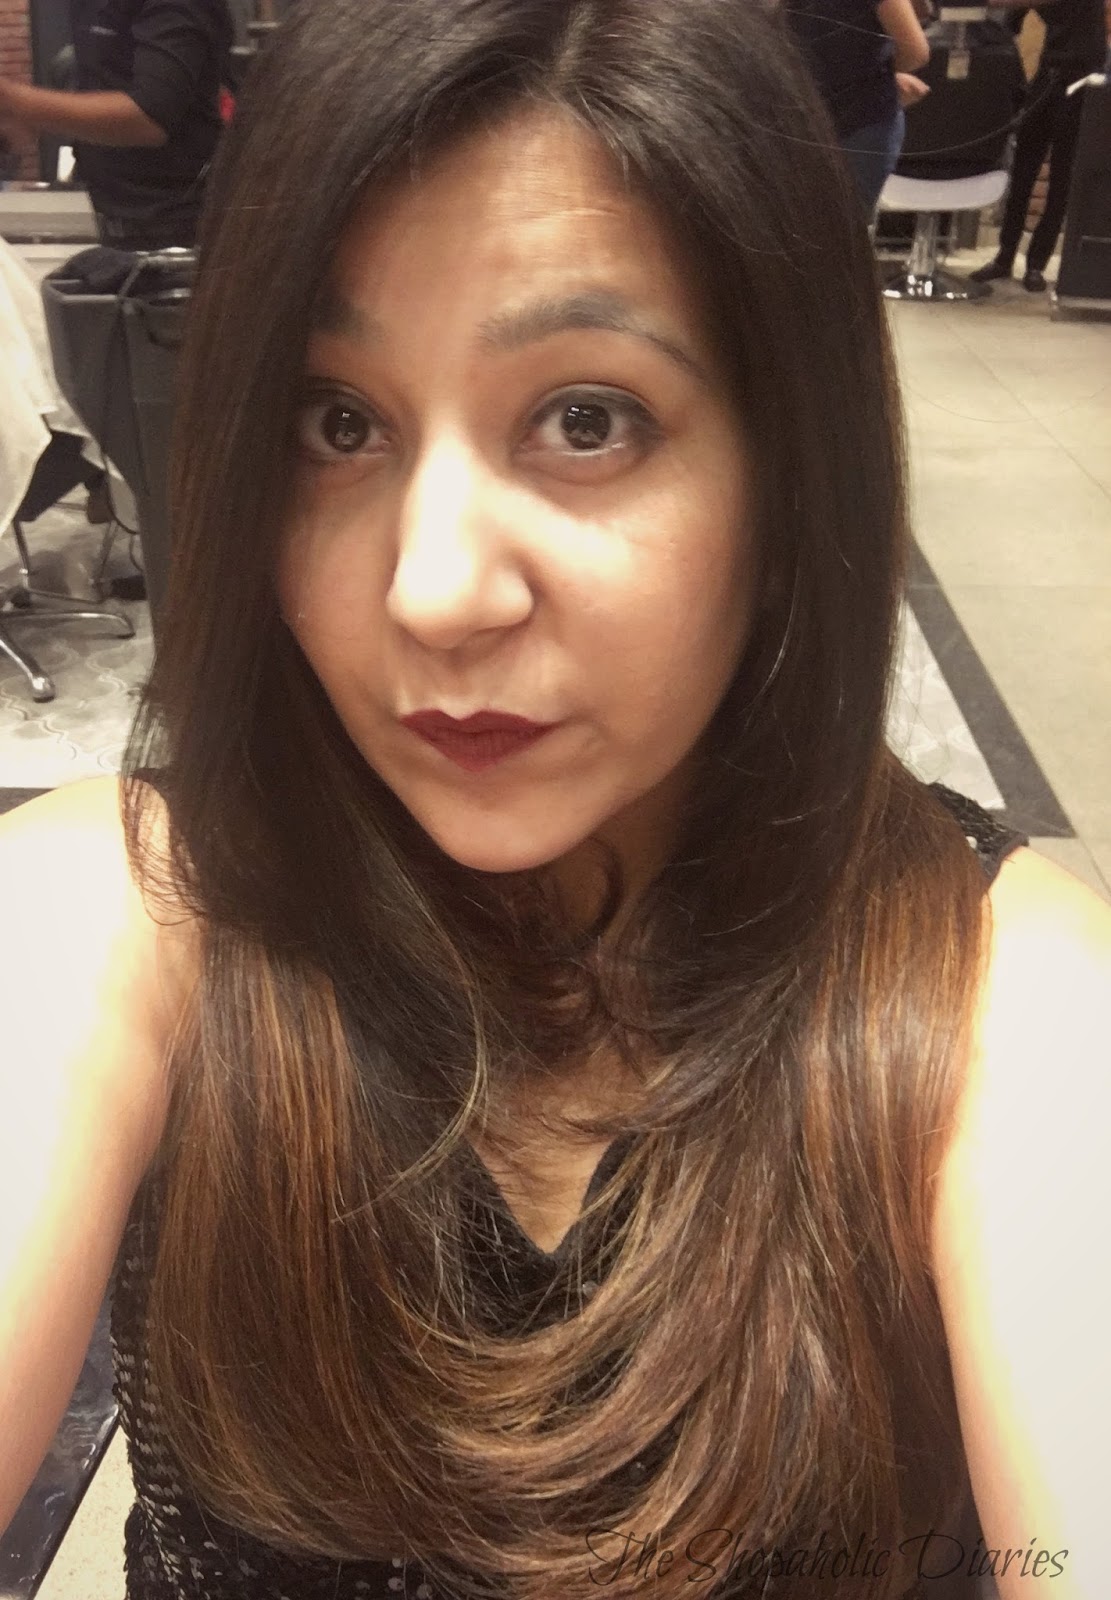 Review : Hair Makeover by Sumit Israni | Geetanjali Salon, DLF Mall of  India, Noida | The Shopaholic Diaries - Indian Fashion, Shopping and  Lifestyle Blog !